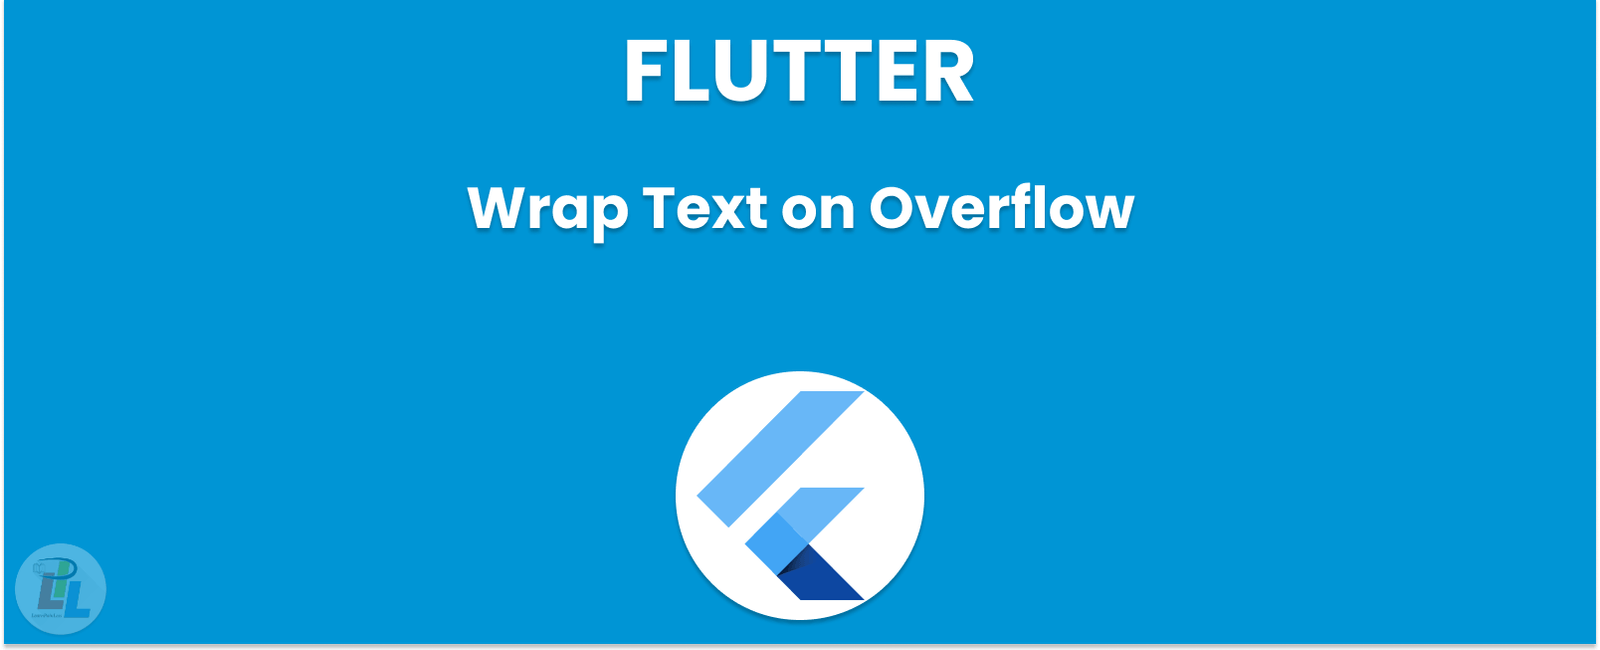 How to Wrap Text on Overflow in Flutter